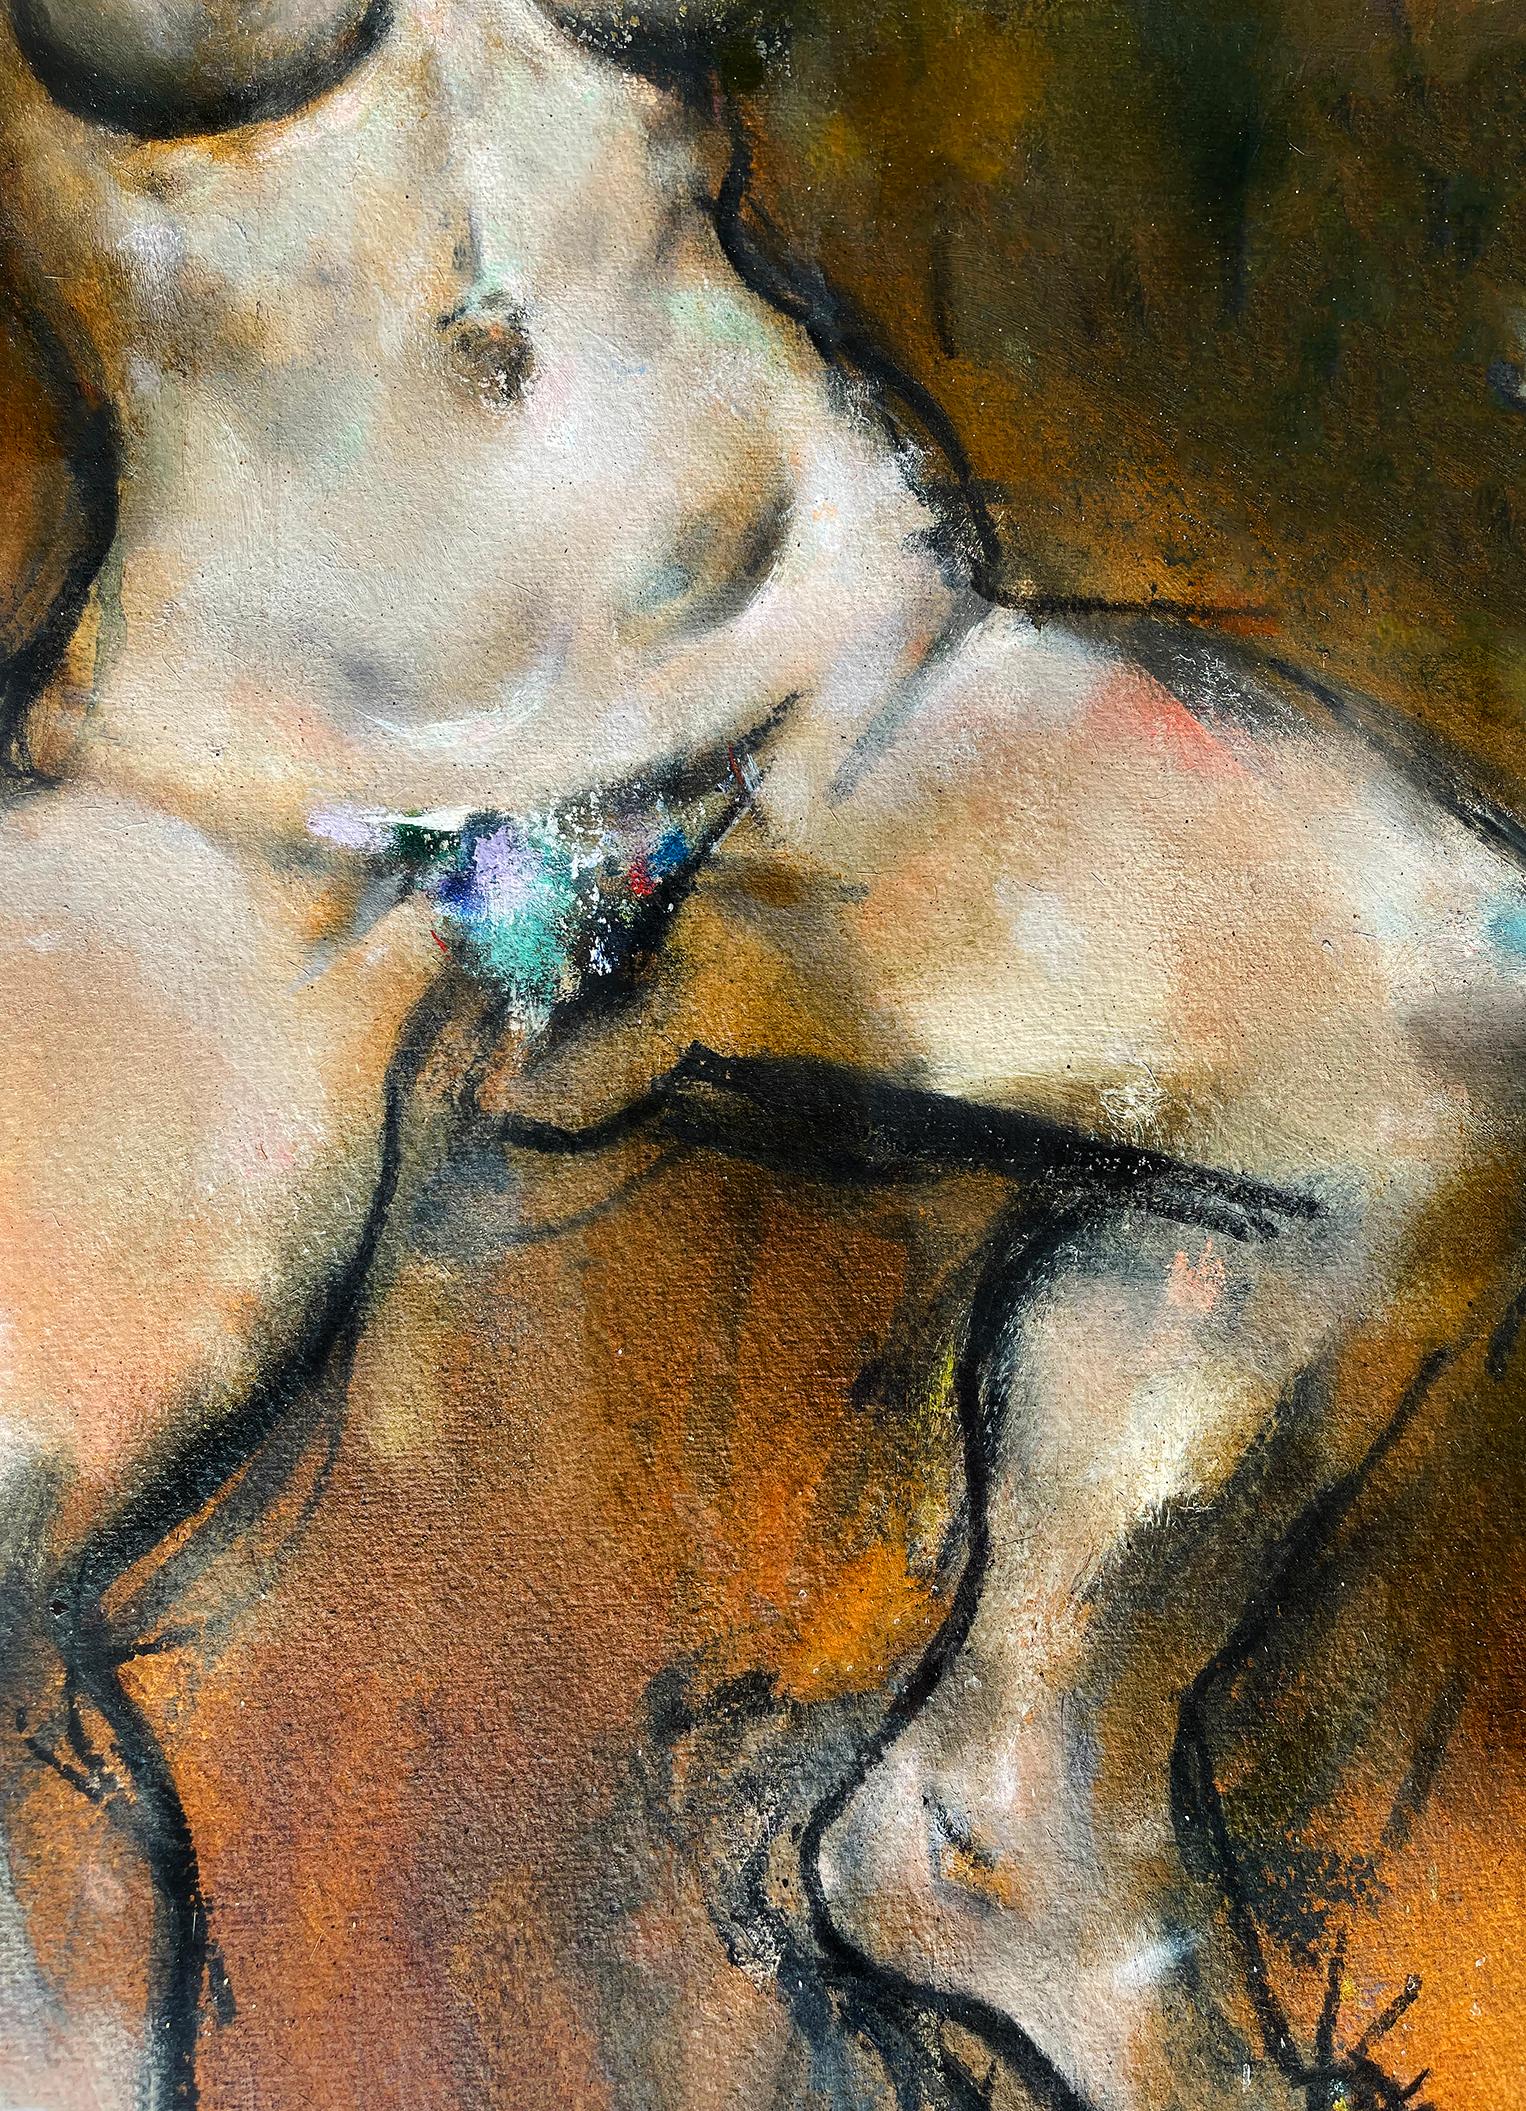 A gritty Burlesque Stripper with long purple gloves bumps and grinds with a hard-driving beat.  American Social Realist artist Jack Levine paints this sensuous nude with in an expressionist style with quick bravura brushstrokes and fast-moving black